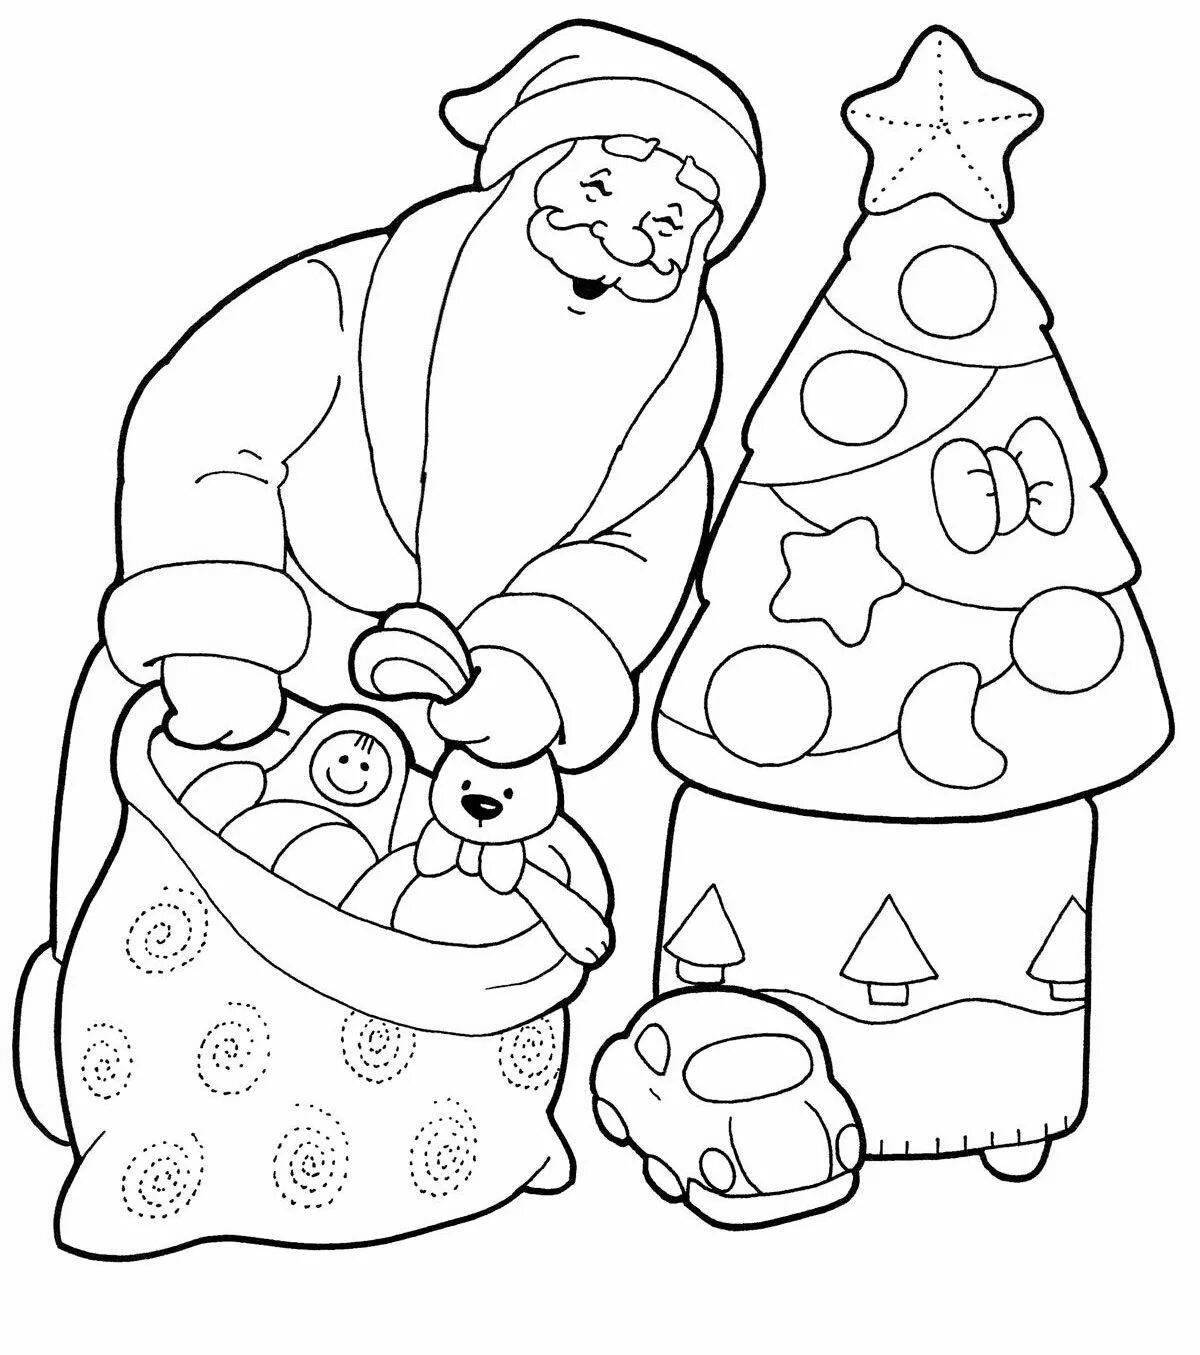 Great freeze coloring book